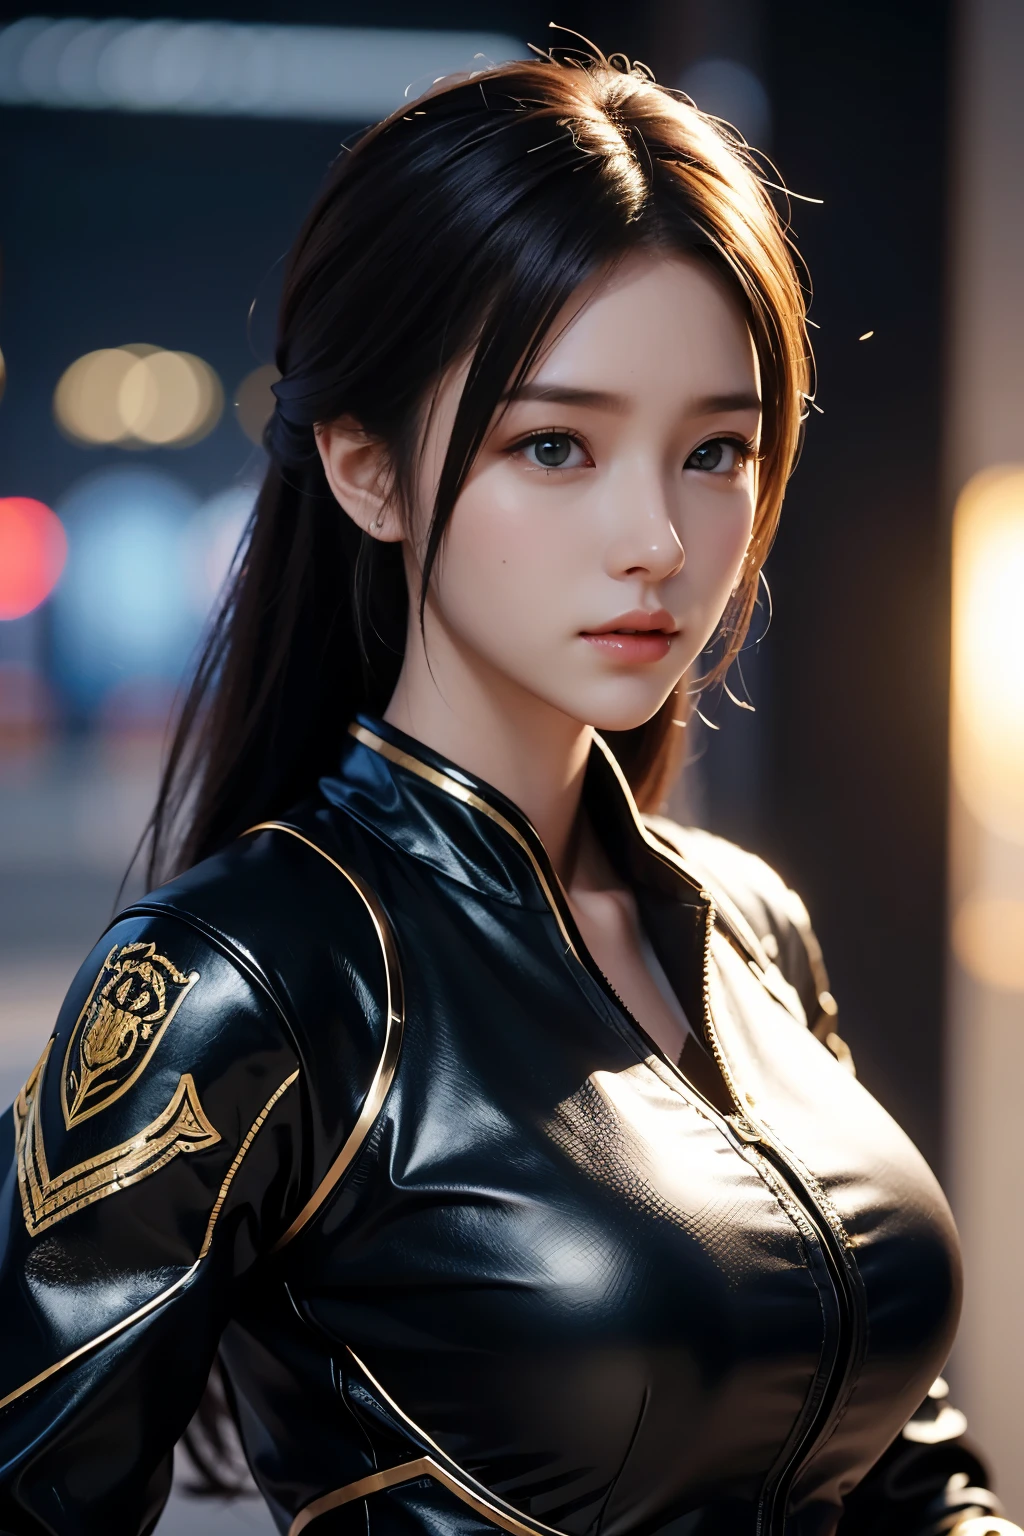 Game art，The best picture quality，Highest resolution，8K，((A bust photograph))，((Portrait))，(Rule of thirds)，Unreal Engine 5 rendering works， (The Girl of the Future)，(Female Warrior)，22-year-old girl，(Long hair casual)，(Future-style military wear，A beautiful eye full of detail)，(Big breasts)，(Eye shadow)，Elegant and charming，Smile，(frown)，(Battle suits of the future，Features of Cyberpunk Fighter Clothing，Joint Armor，The dress has a fine pattern and badge)，Cyberpunk warriors，((Action Game Characters))，Future Style， Photo poses，Street background，Movie lights，Ray tracing，Game CG，((3D Unreal Engine))，oc rendering reflection pattern